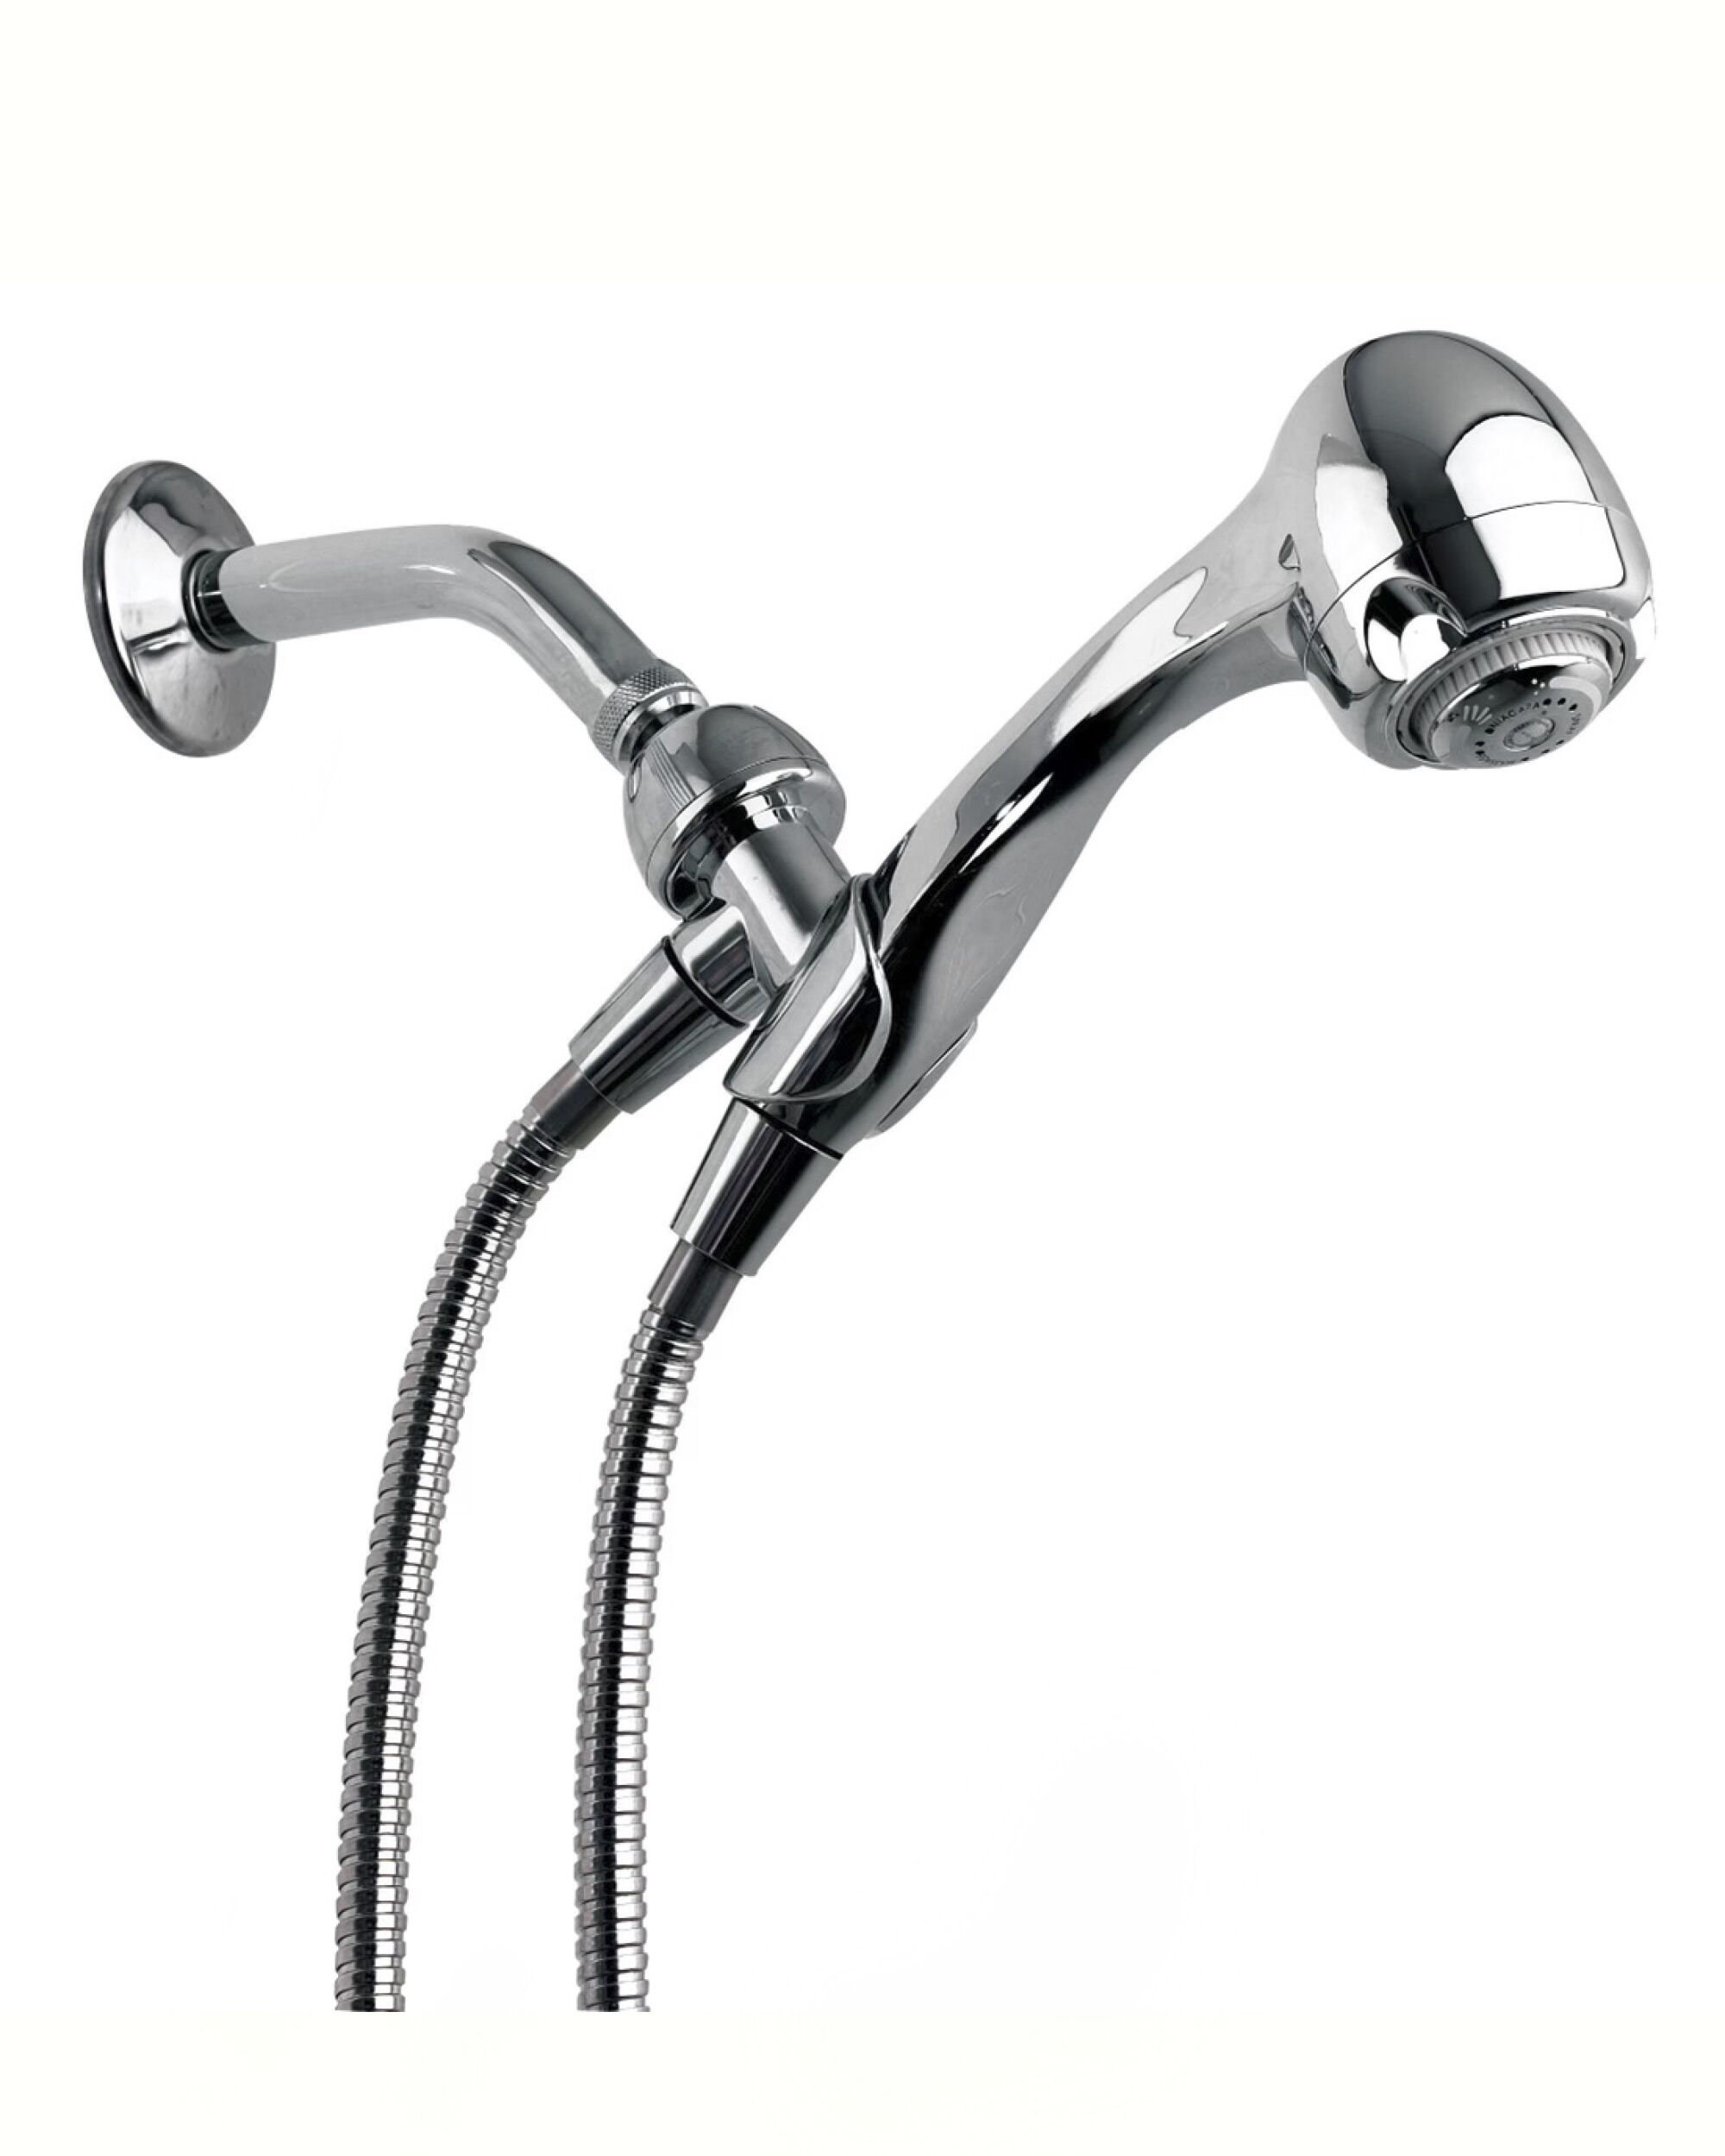 The 3-spray pattern 1.5 GPM hand-held shower head by Niagara Conservation